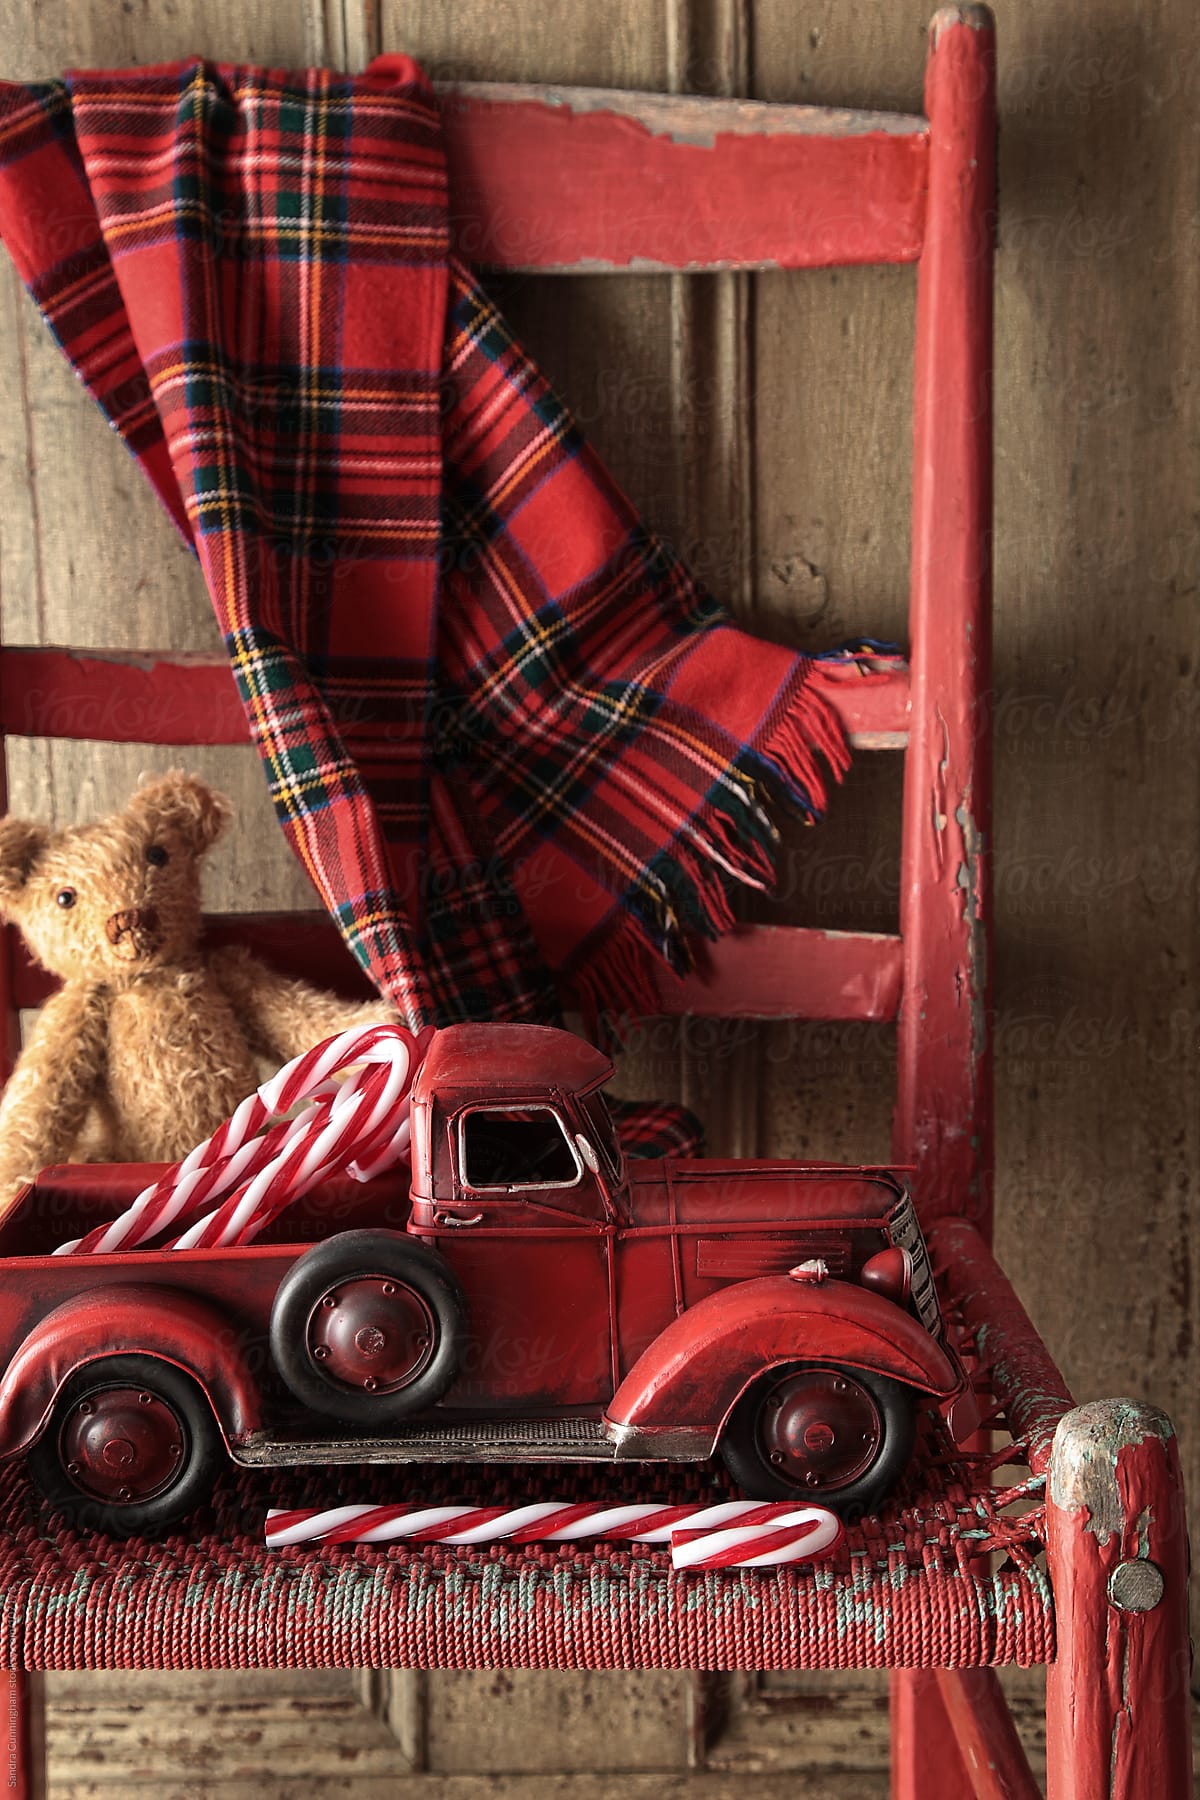 Old toy truck with teddy bear on red chair